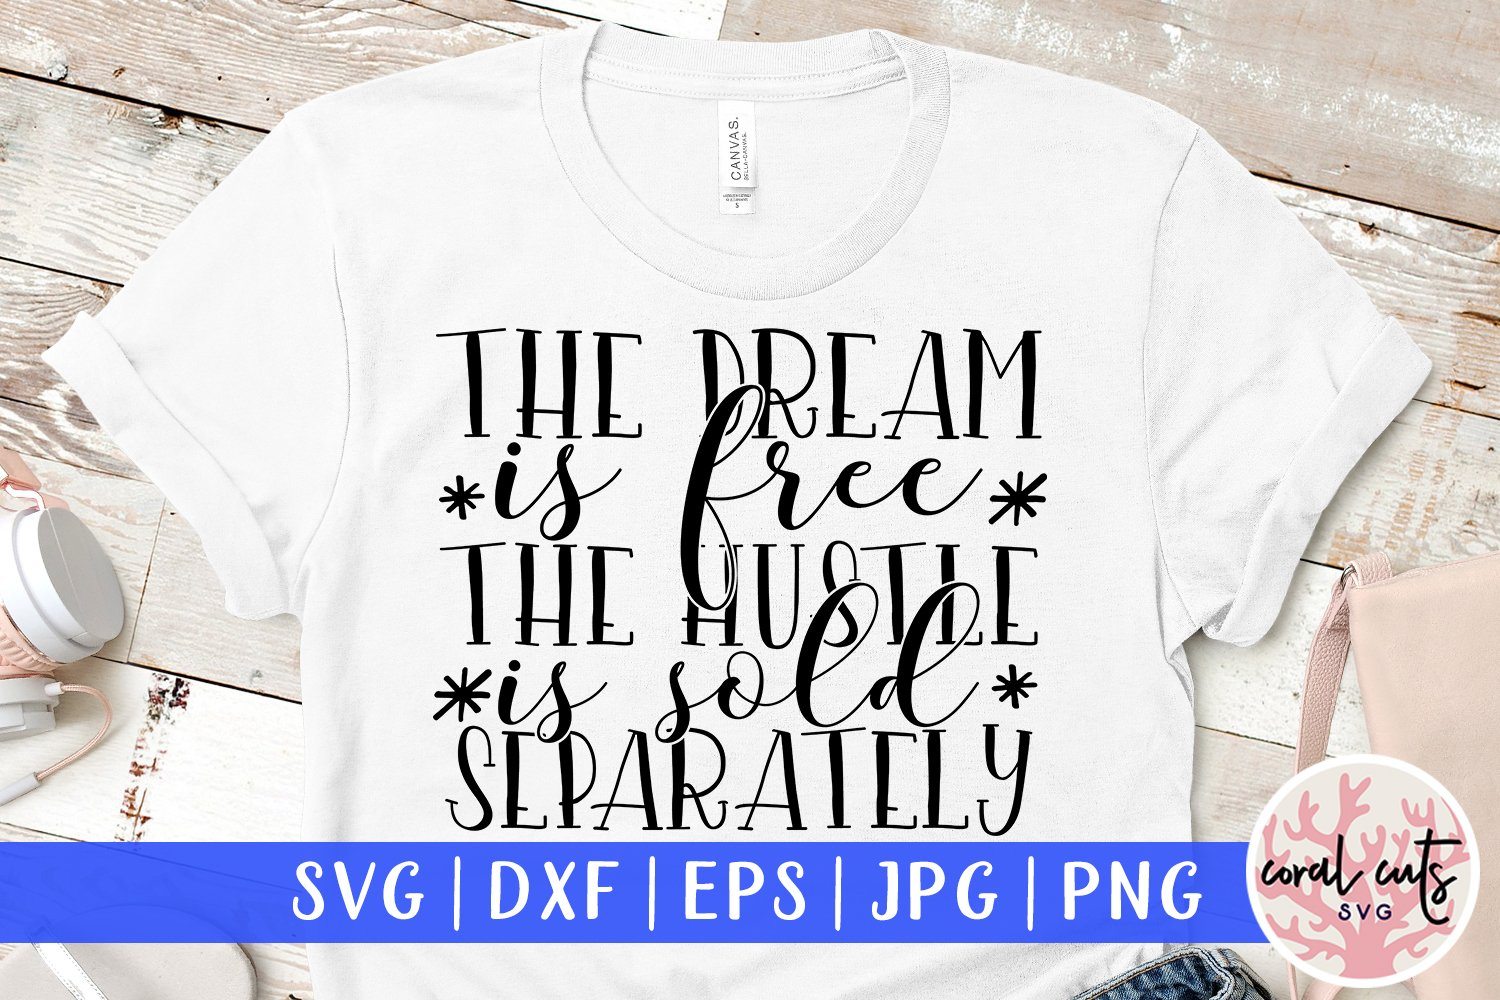 Download The Dream Is Free The Hustle Is Sold Separately Women Empowerment Svg Eps Dxf Png File So Fontsy